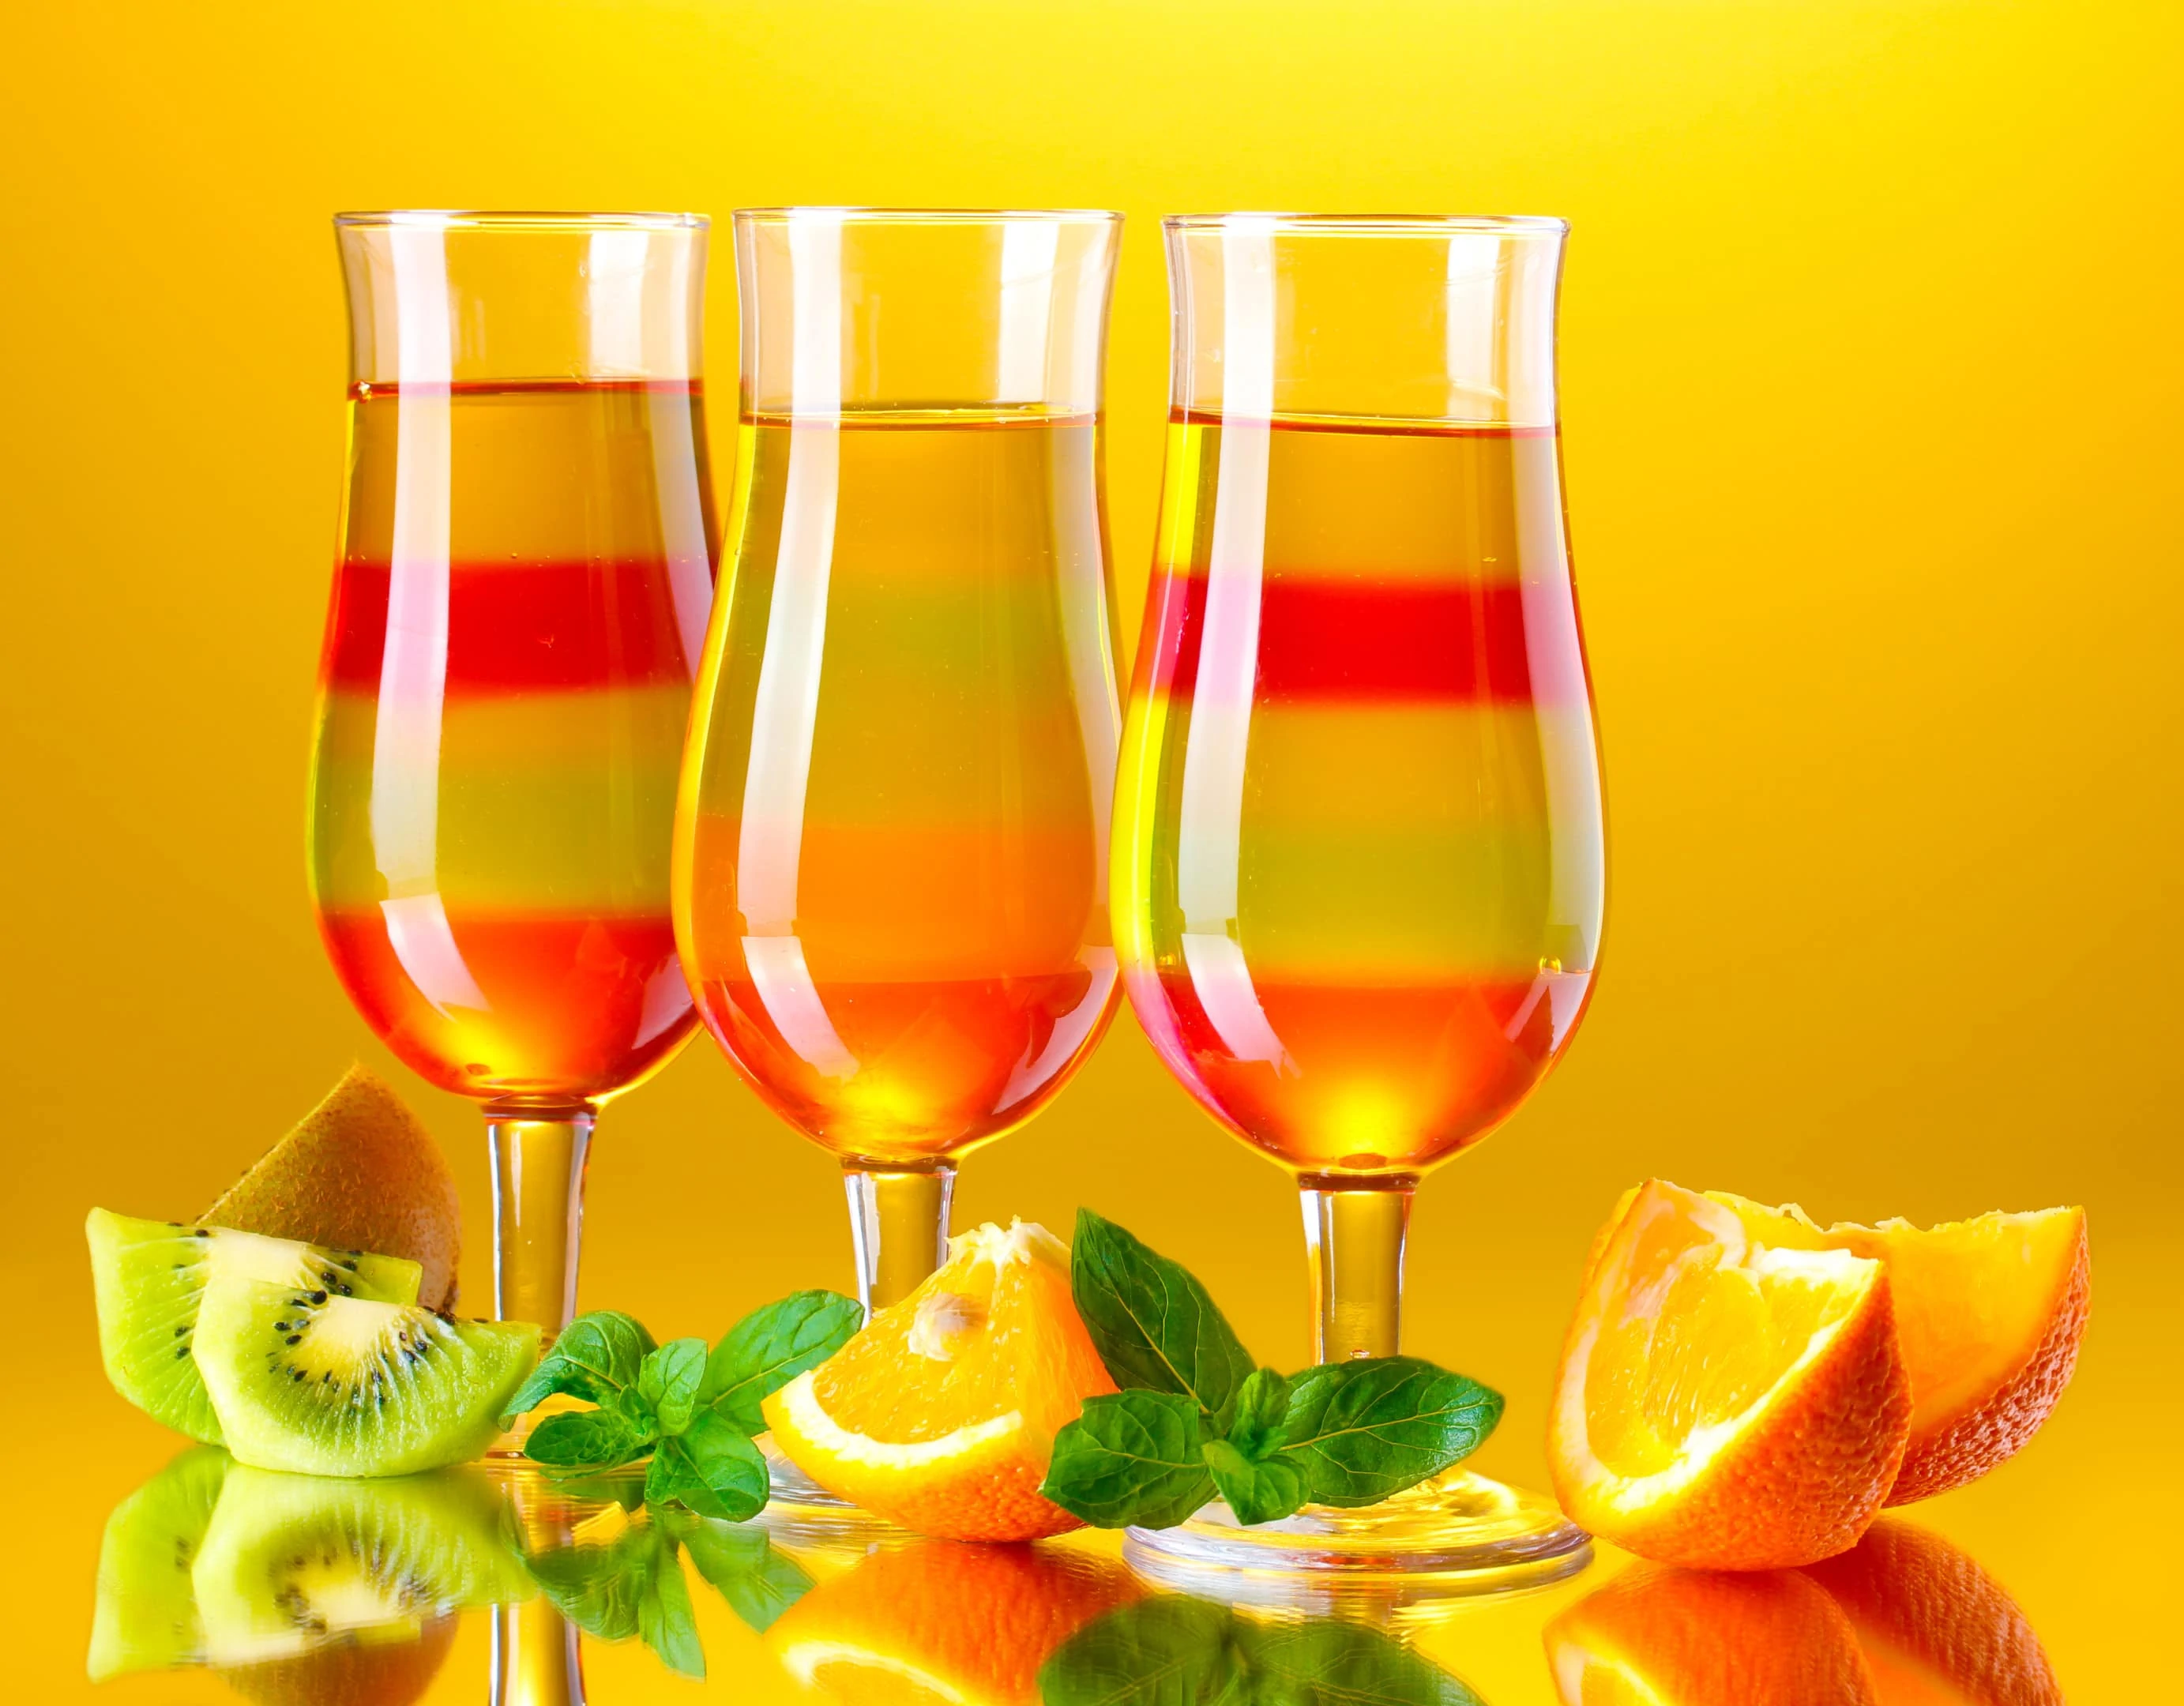 Fruit jelly gelatin in tall glasses with fresh fruits on yellow background